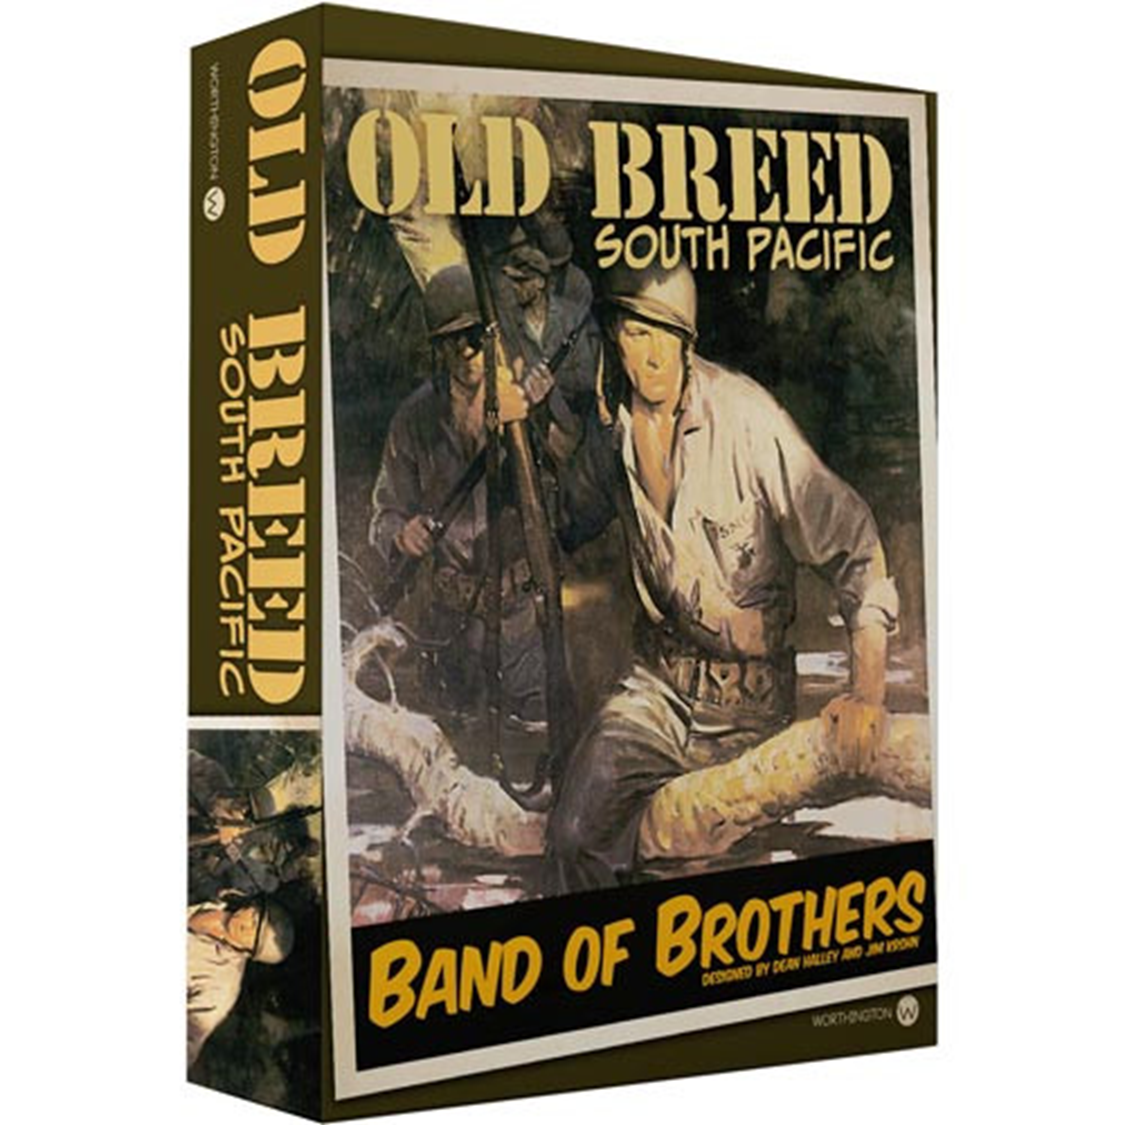 Band of Brothers: Old Breed South Pacific (DING/DENT-Medium)